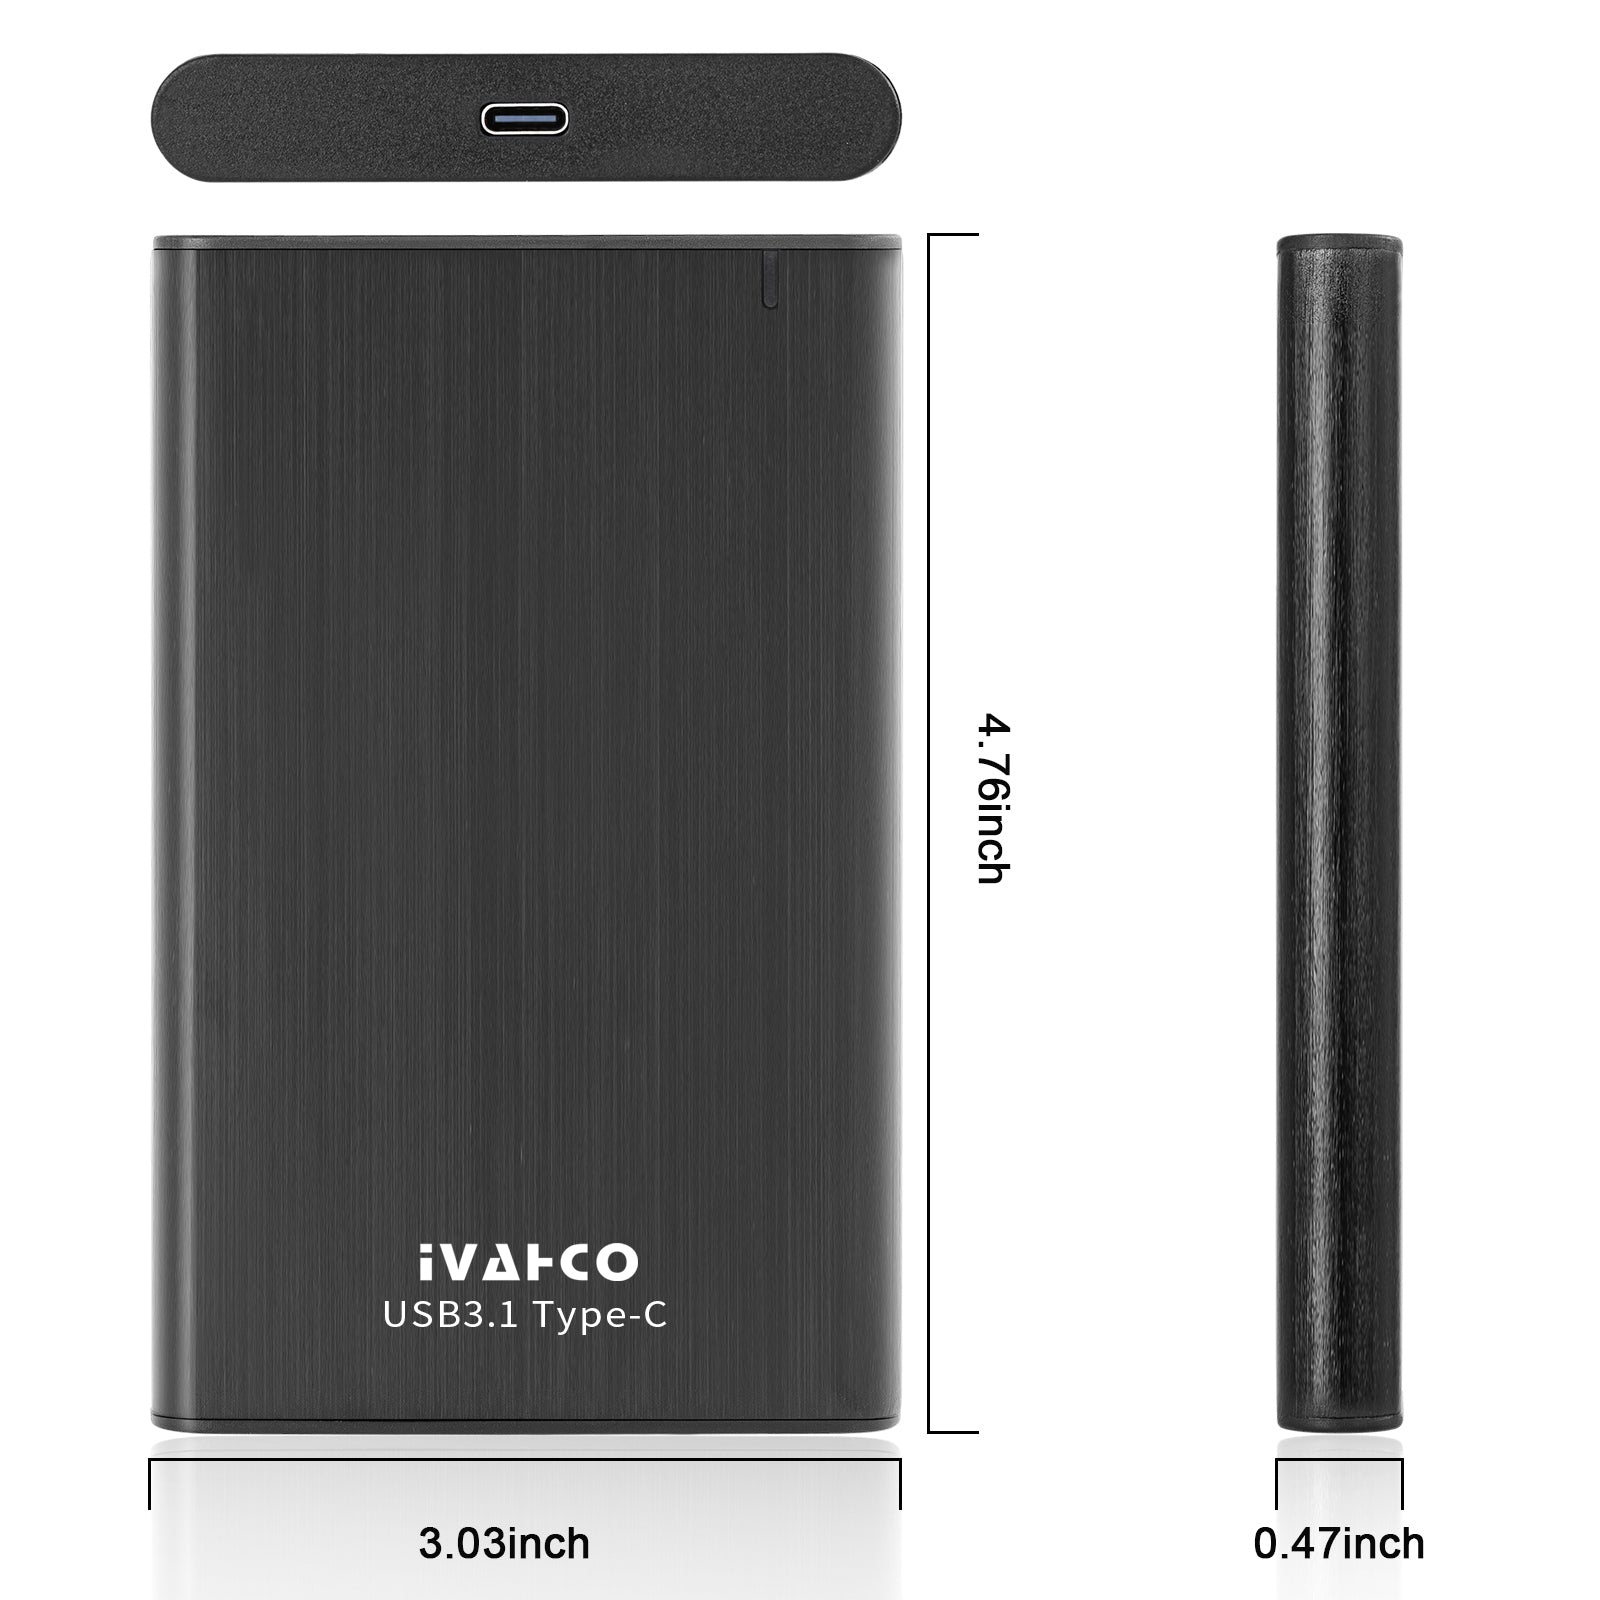 IVAHCO 320GB Type-C USB3.1 Solid State Drive Enclosure Brushed Metal 2.5" HDD External Case - Black